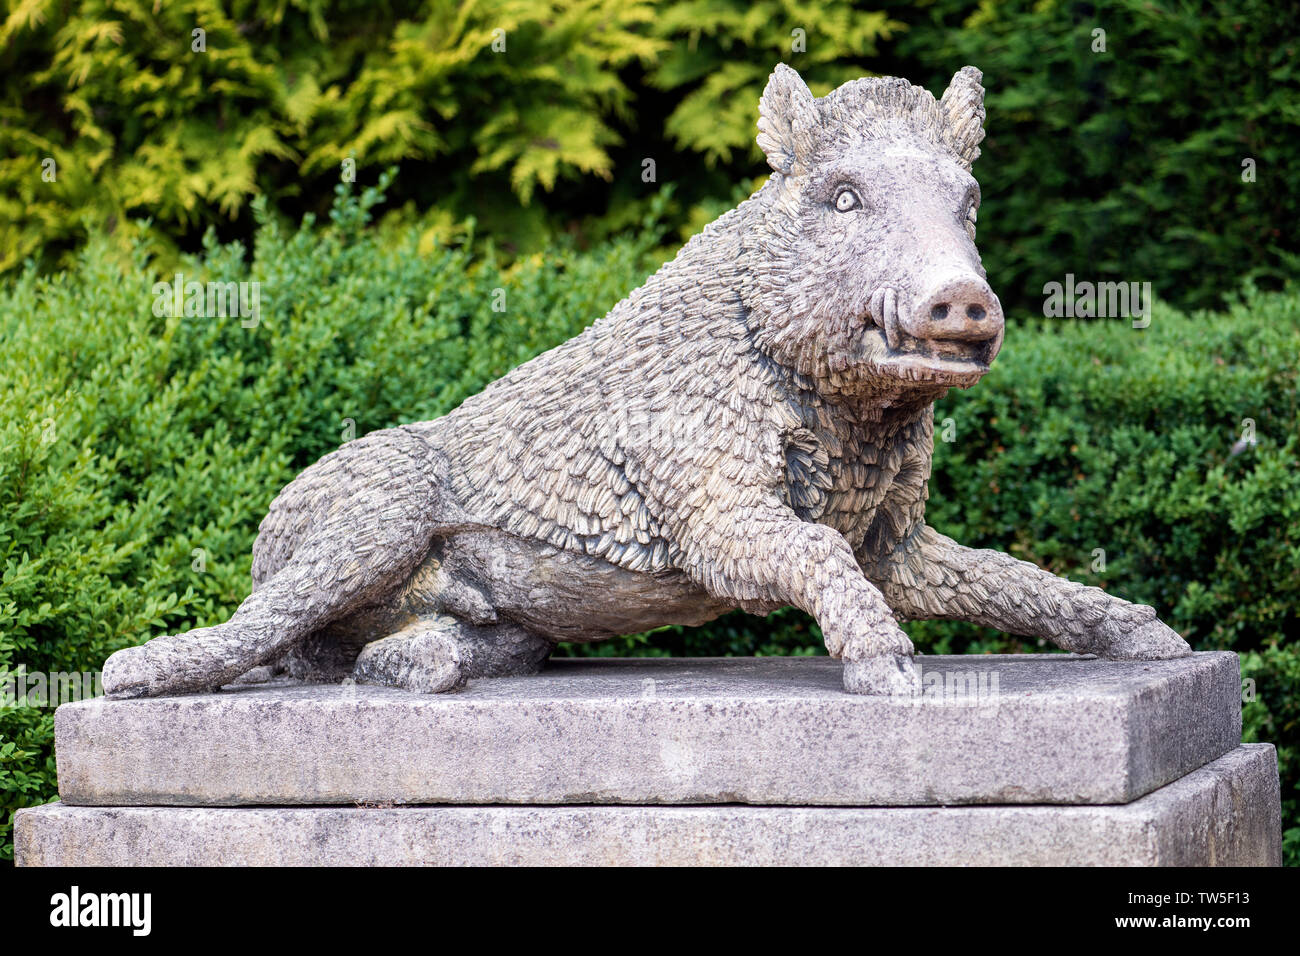 Garden statue made of concrete life size animal, wild boar pig, UK. Stock Photo